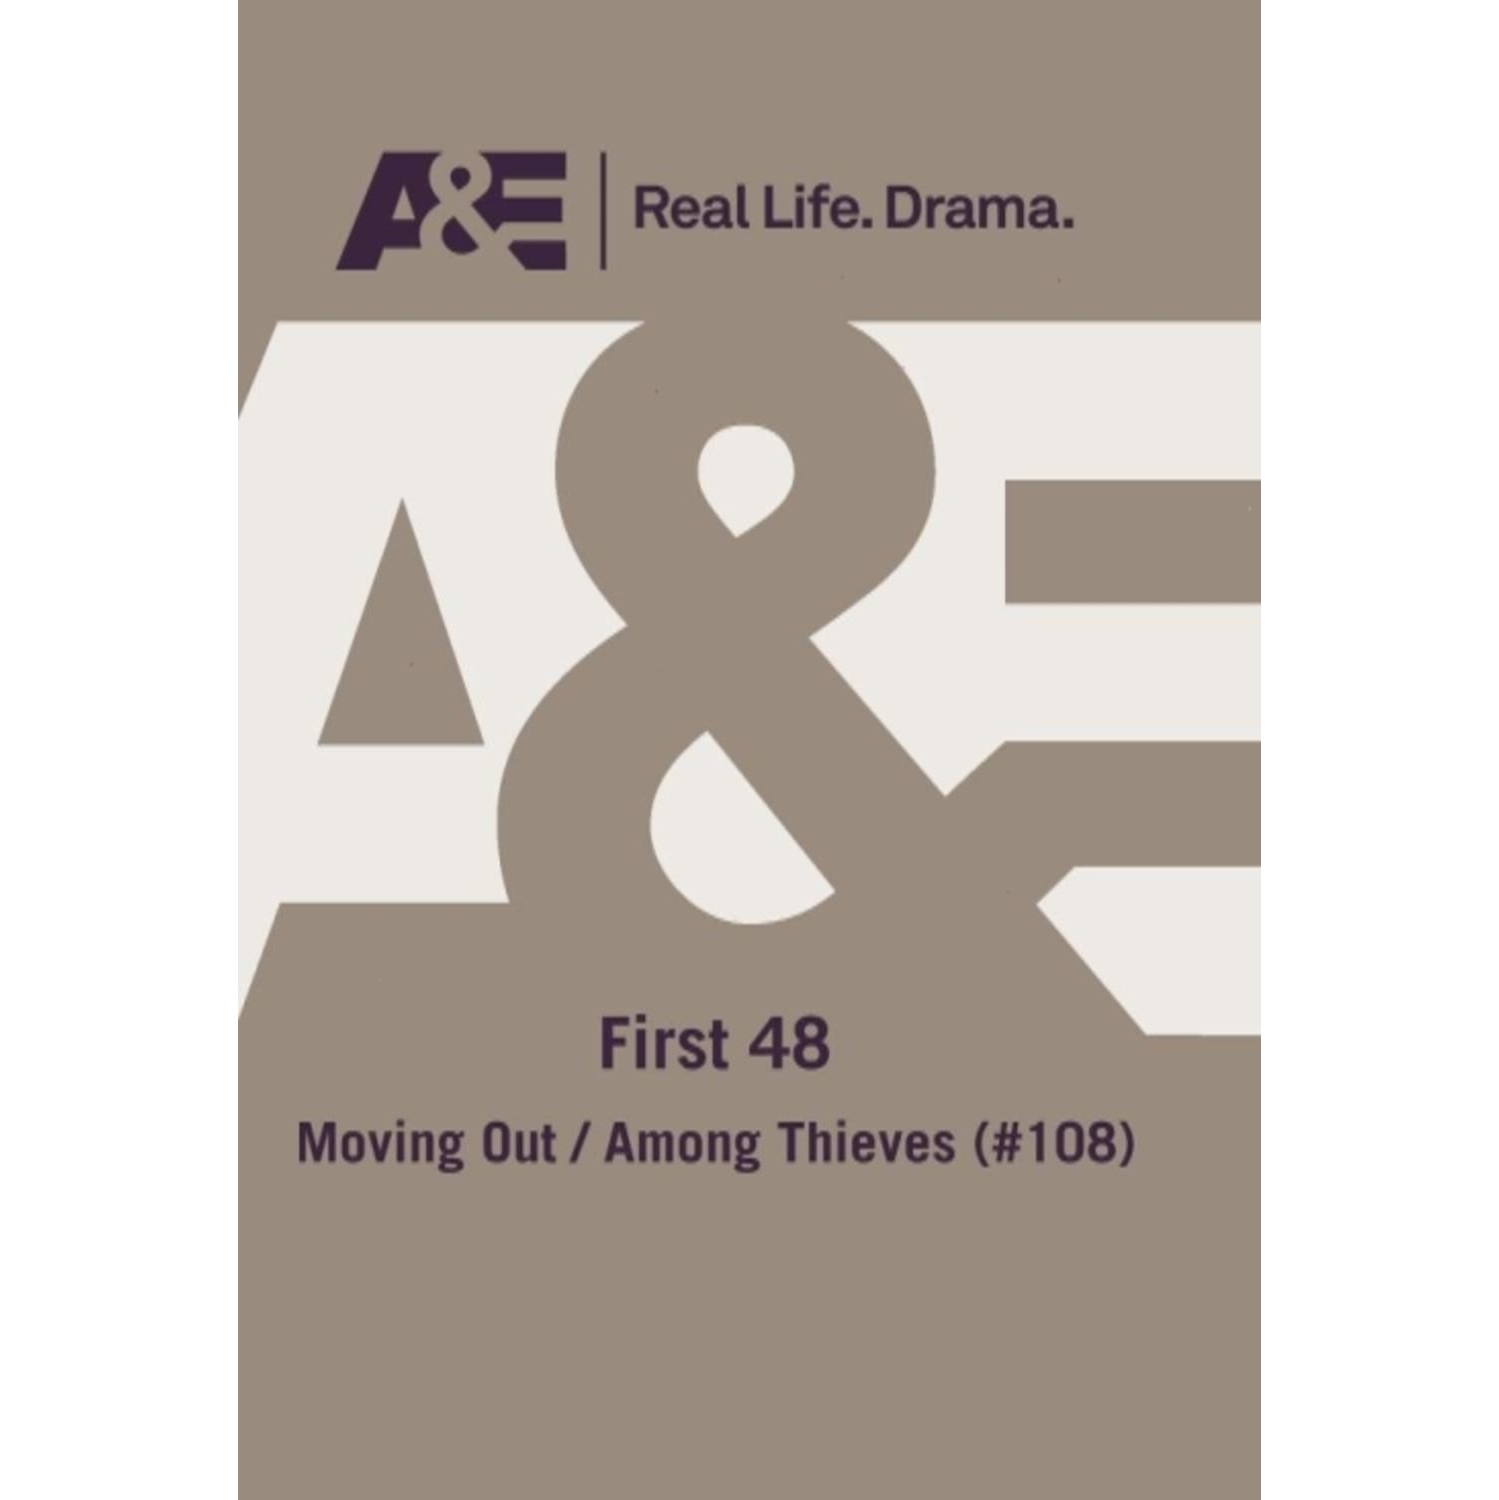 First 48: Moving Out / Among Thieves